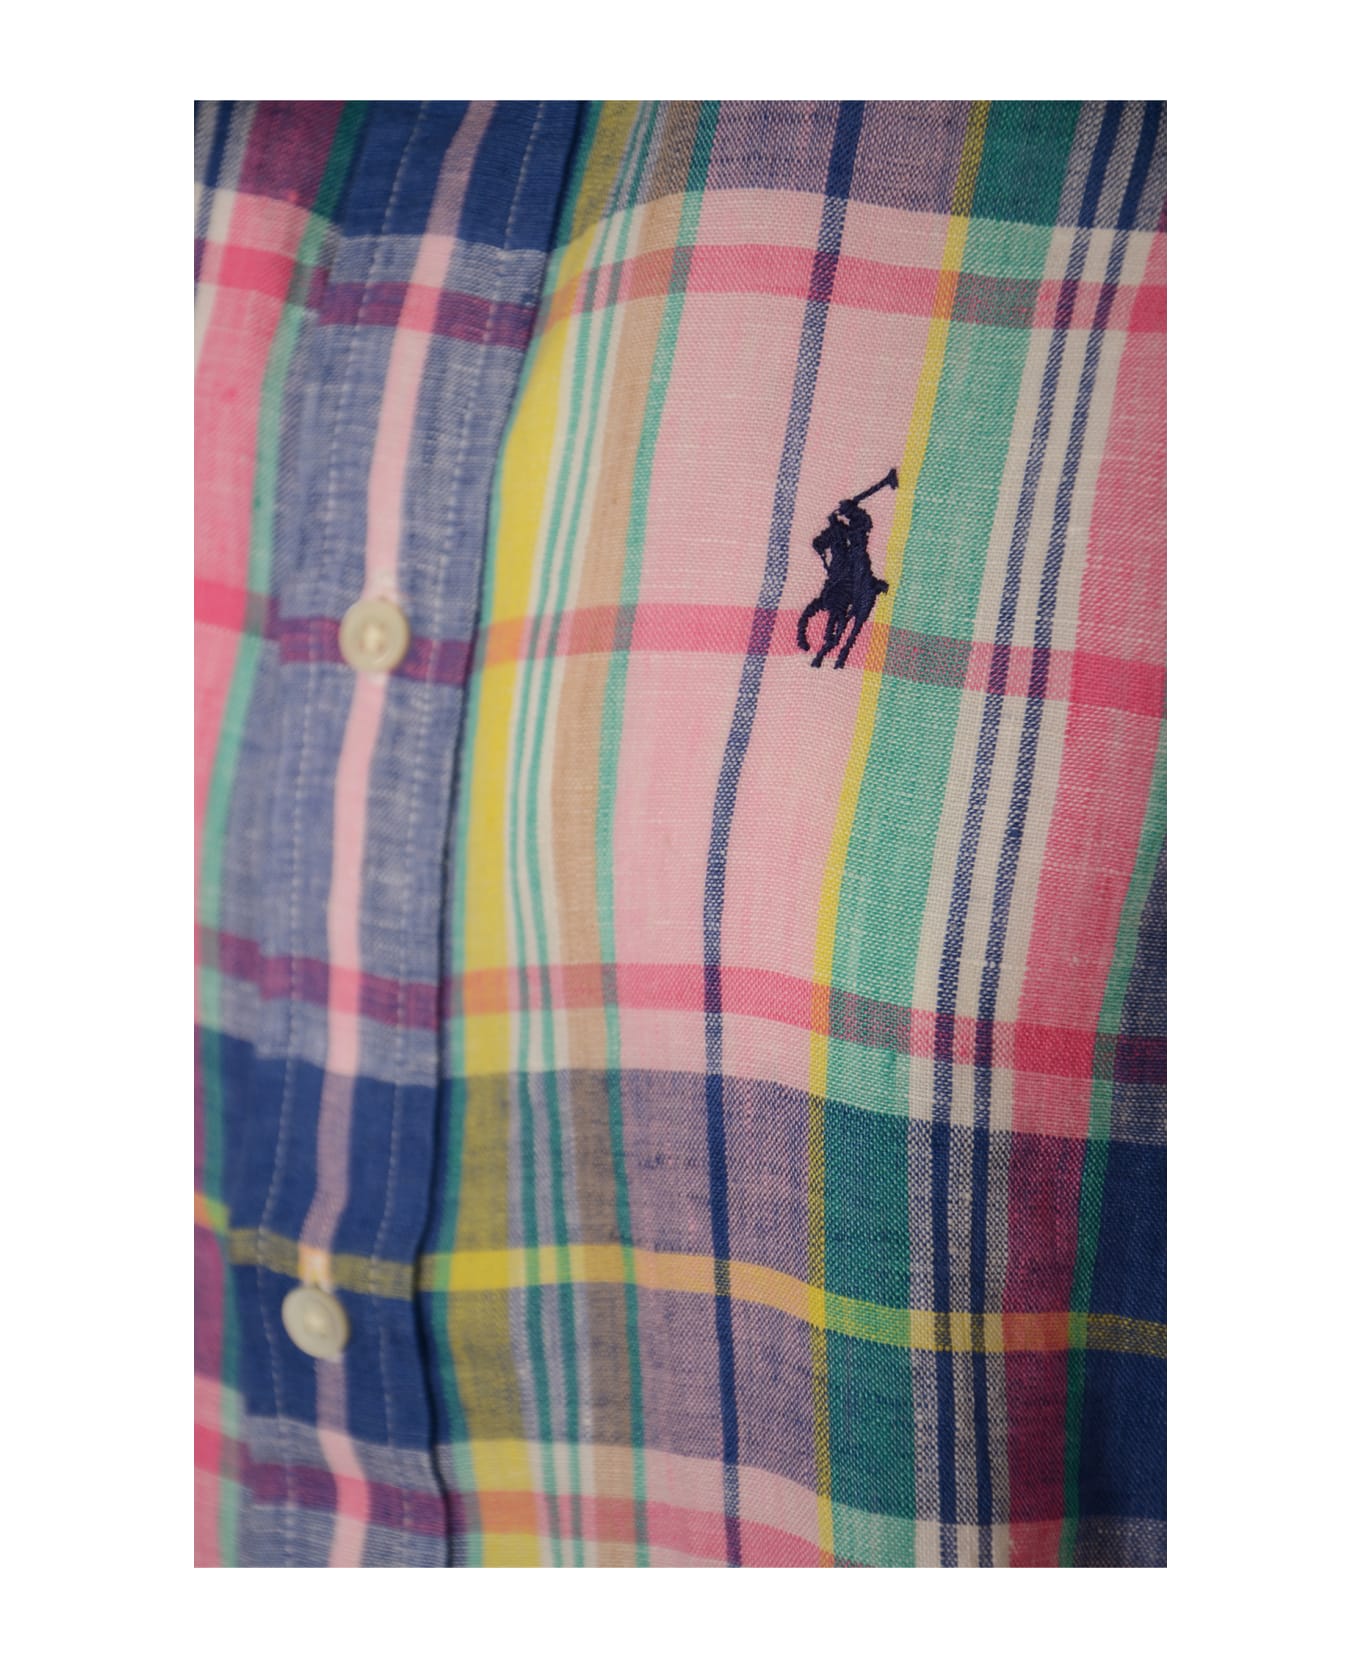 Polo Ralph Lauren Logo Embroidered Check Pattern Round Hem Shirt - Multicolor